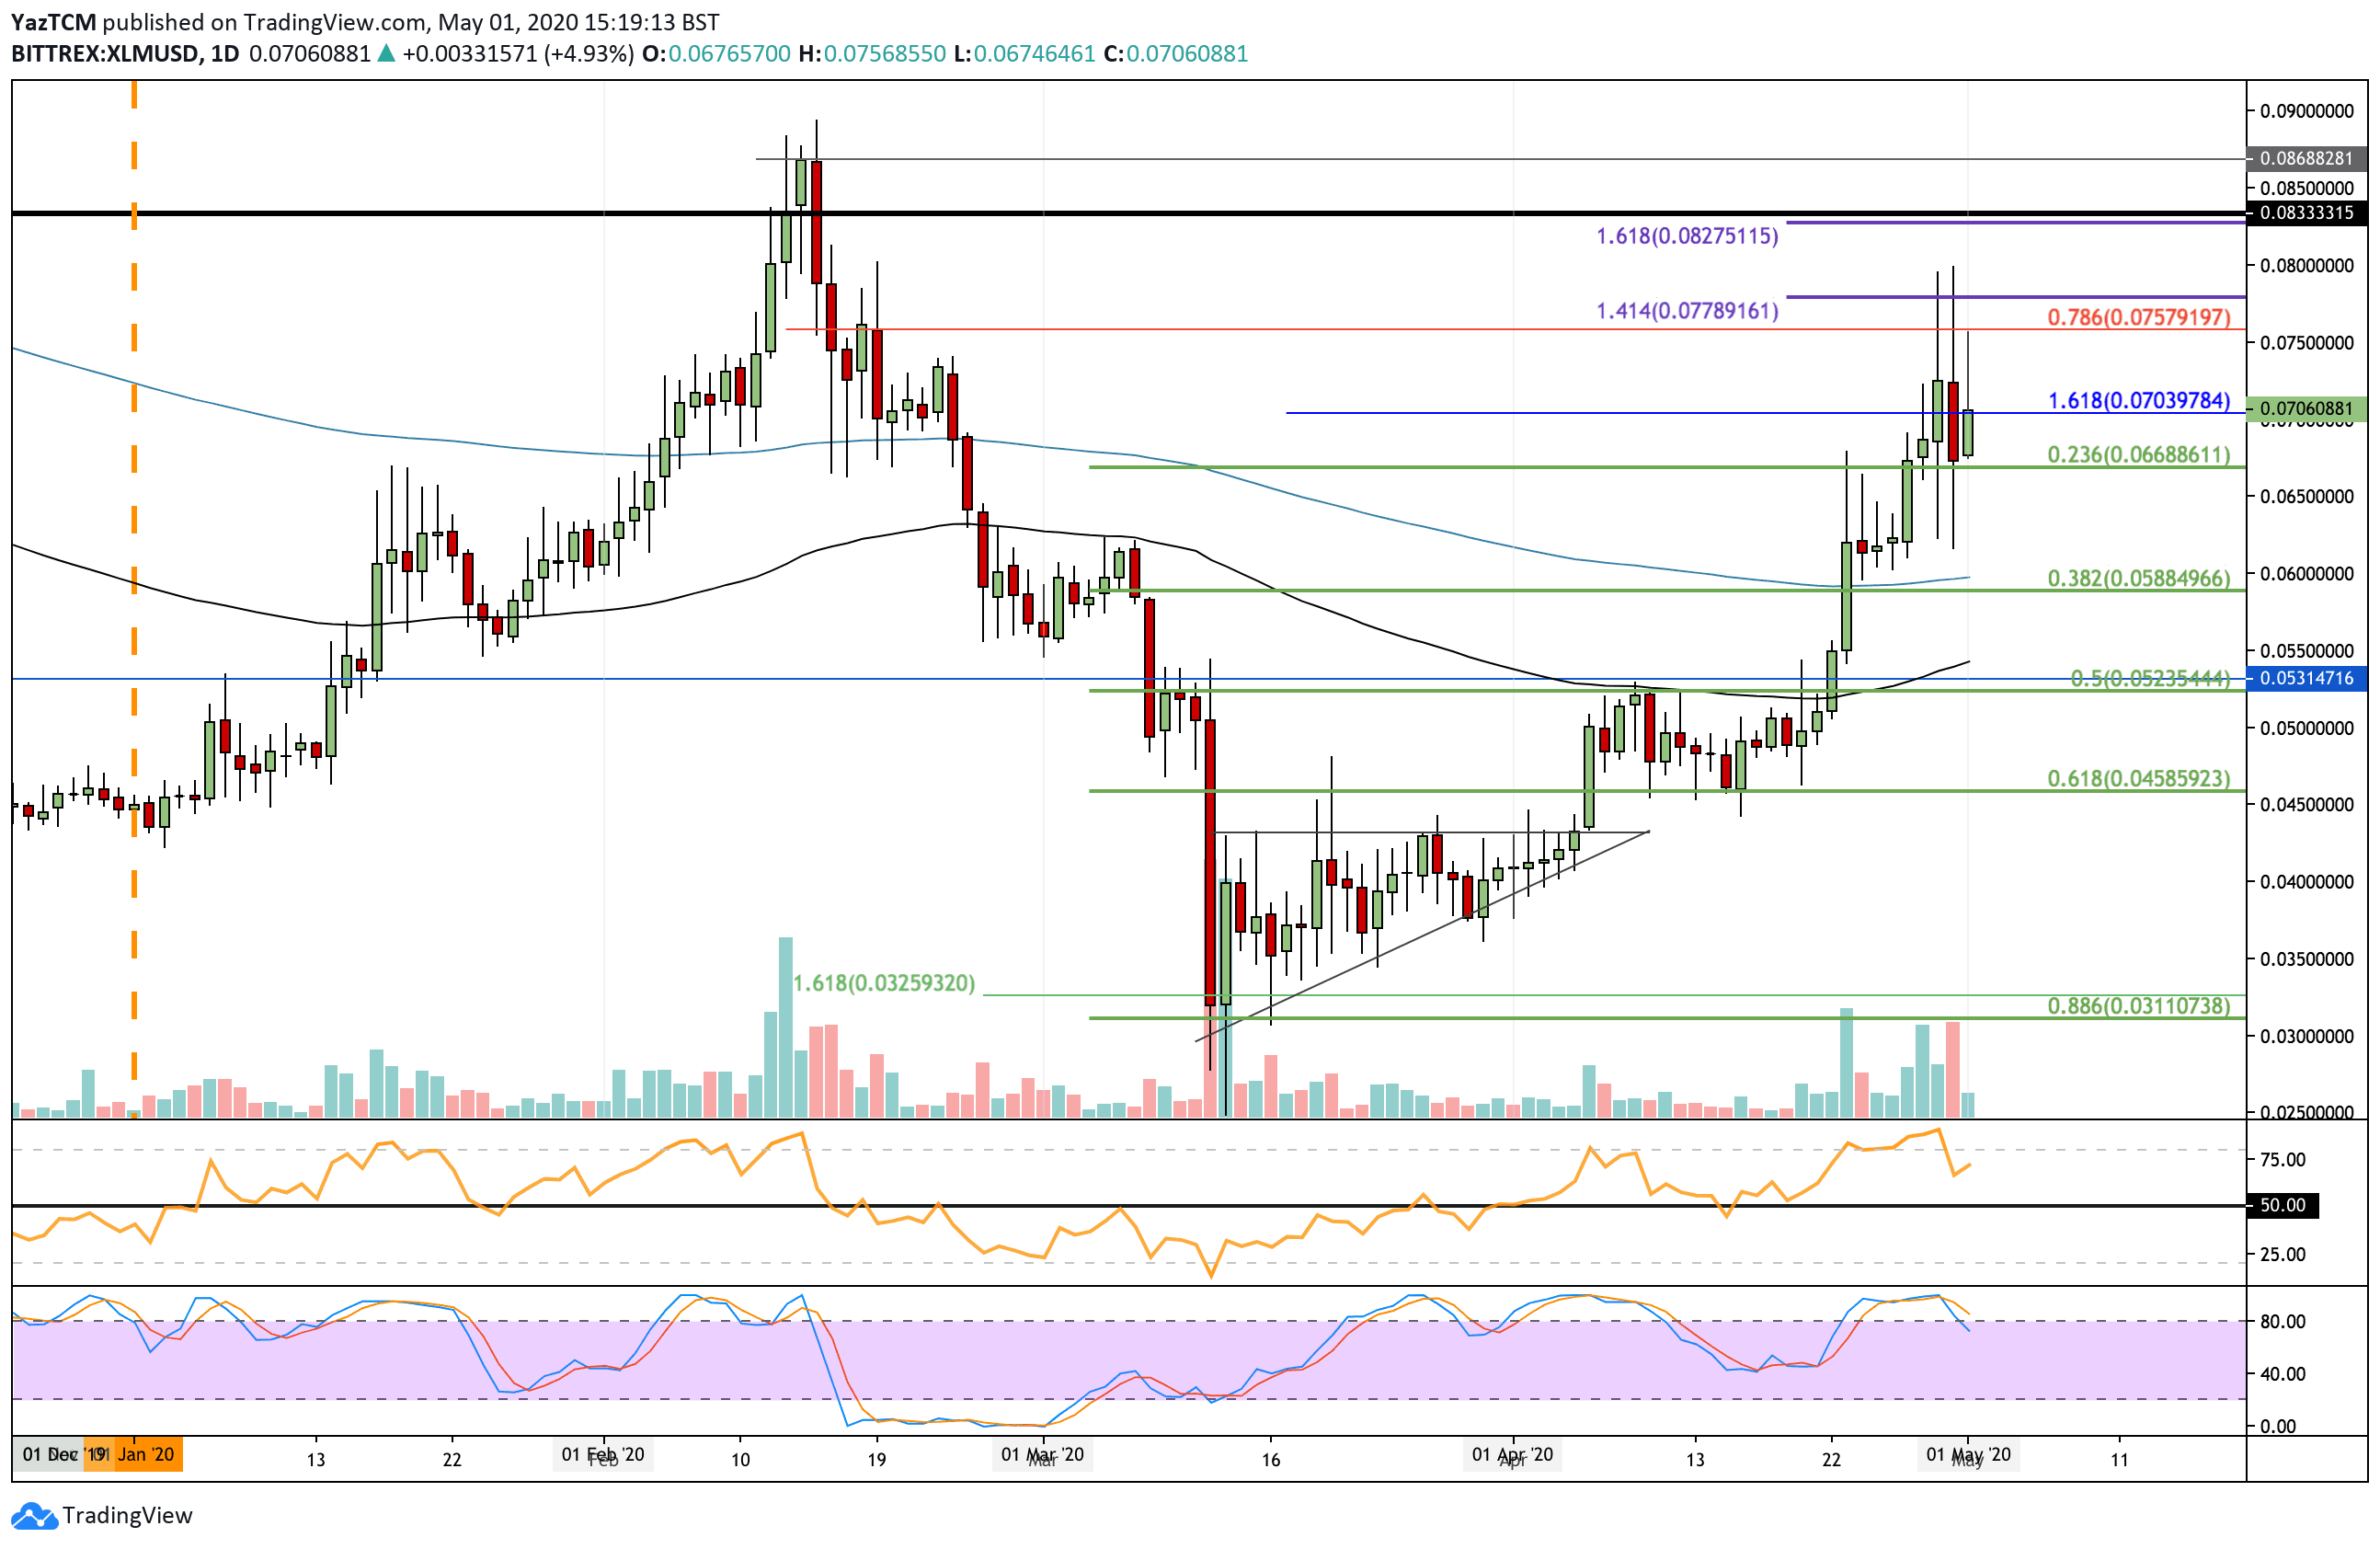 Crypto Price Analysis & Overview May 1st: Bitcoin, Ethereum, Ripple, Stellar, and Chainlink